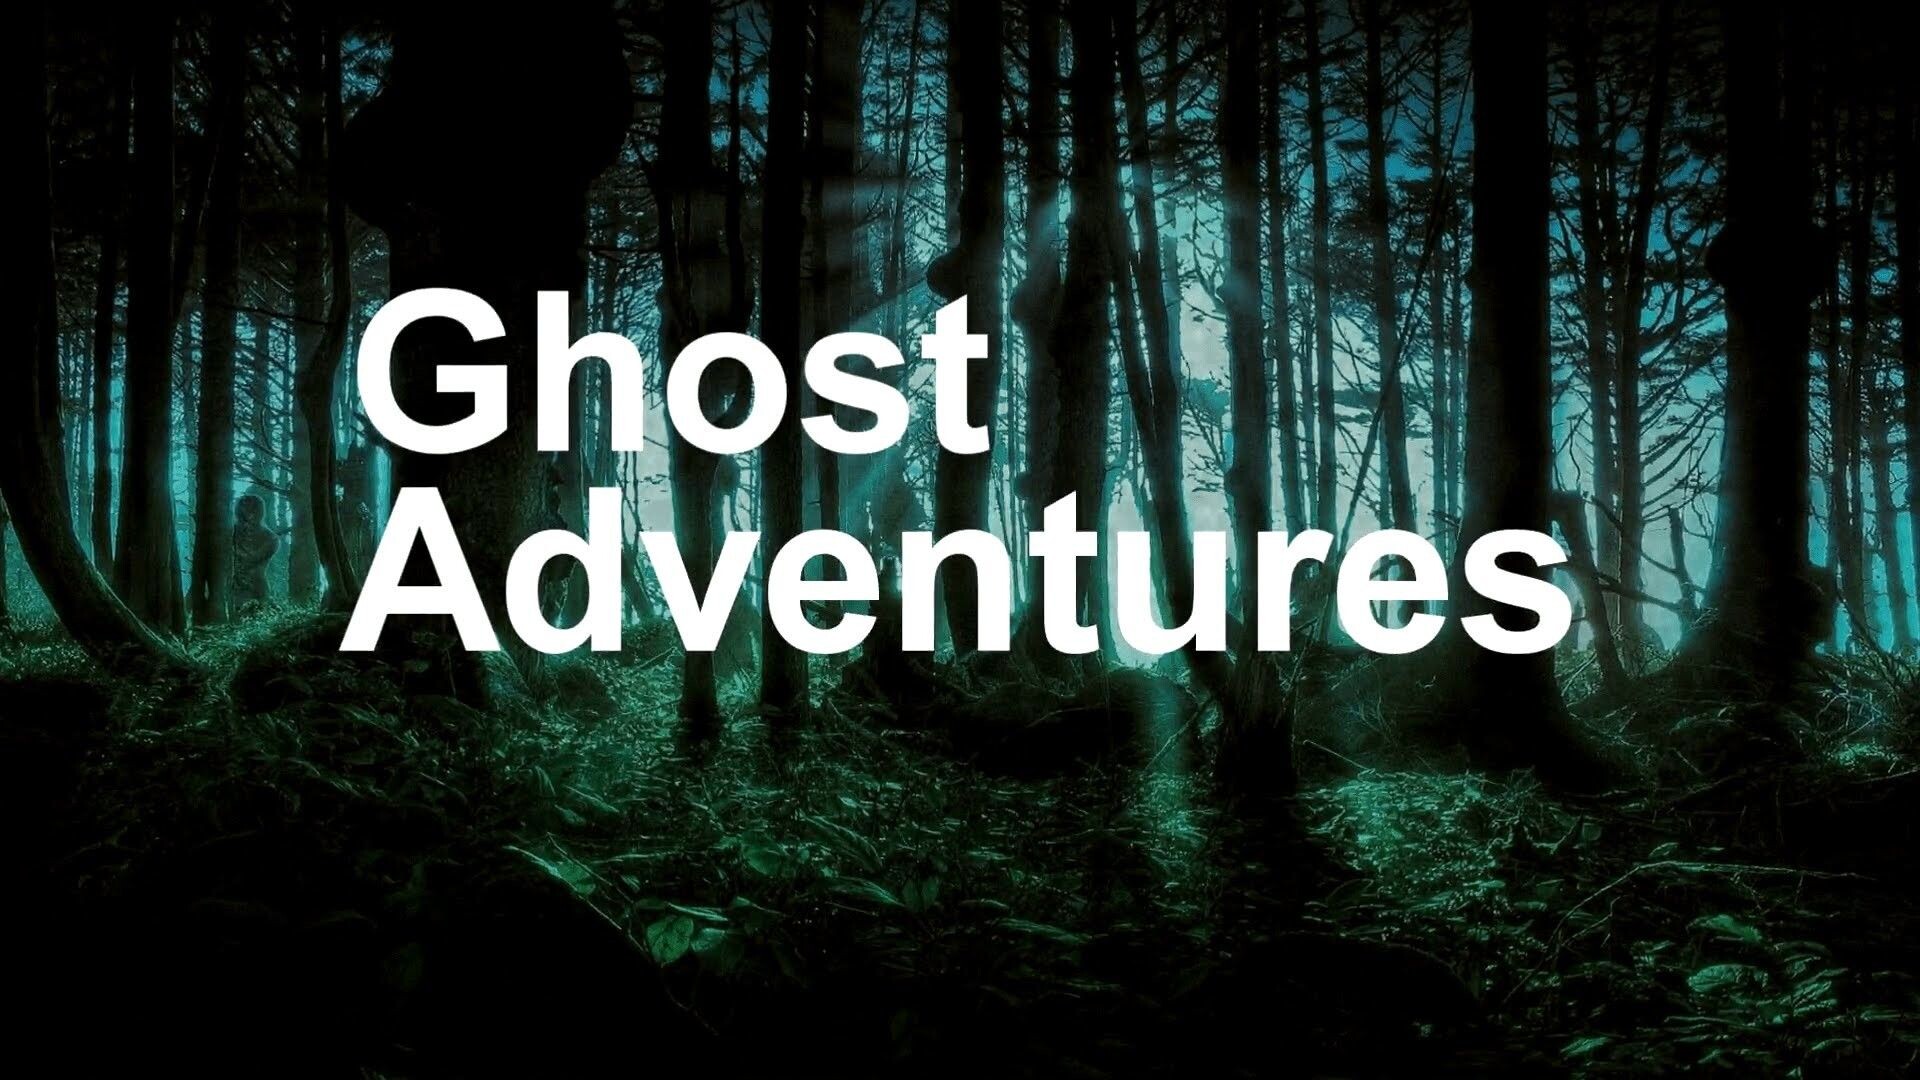 Ghost Adventures (TV Series): An American paranormal and reality television show that premiered on October 17, 2008, on the Travel Channel. 1920x1080 Full HD Wallpaper.